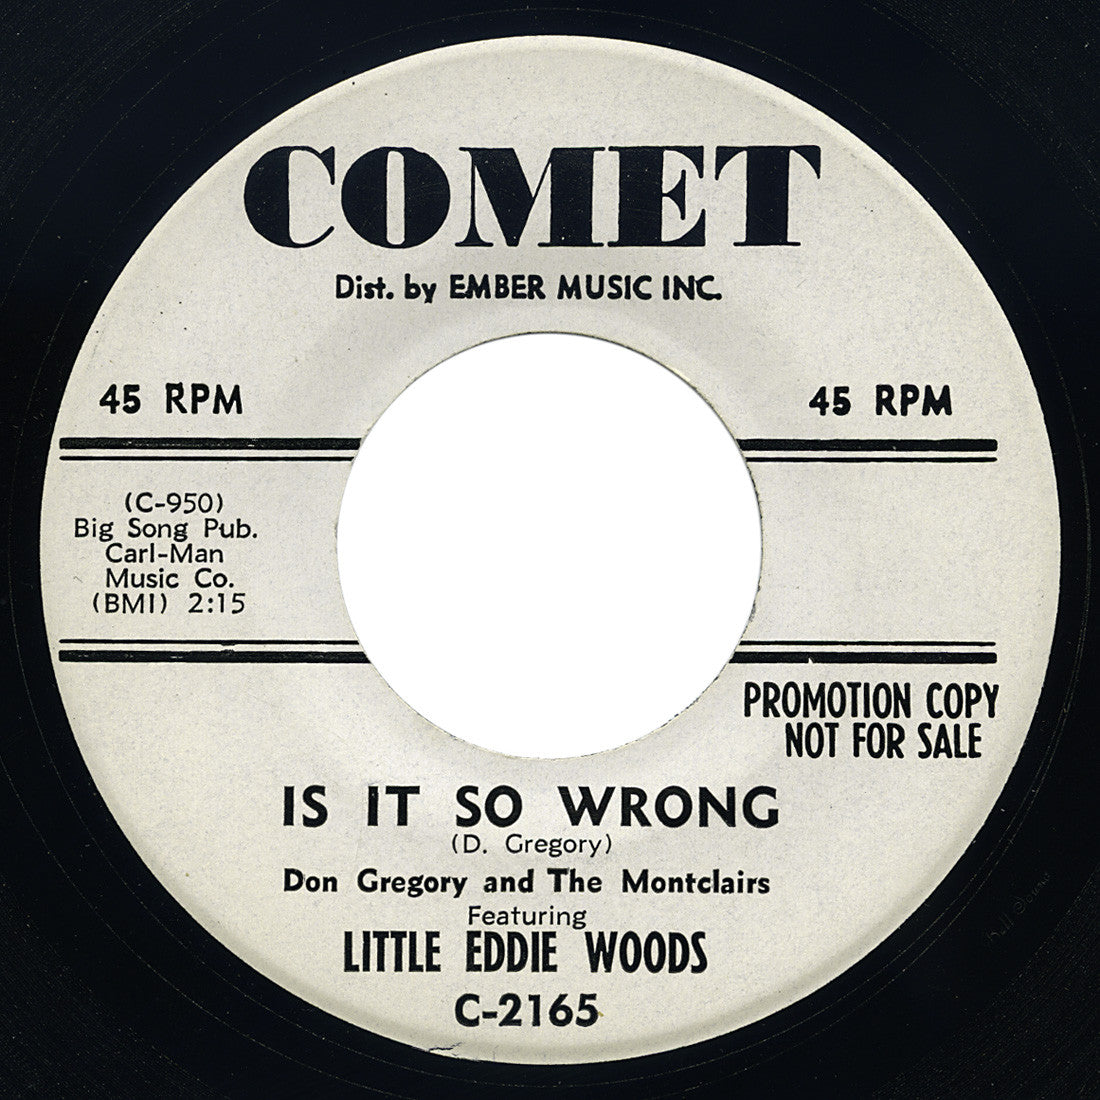 Don Gregory and The Montclairs featuring Little Eddie Woods – Is It So Wrong – Comet